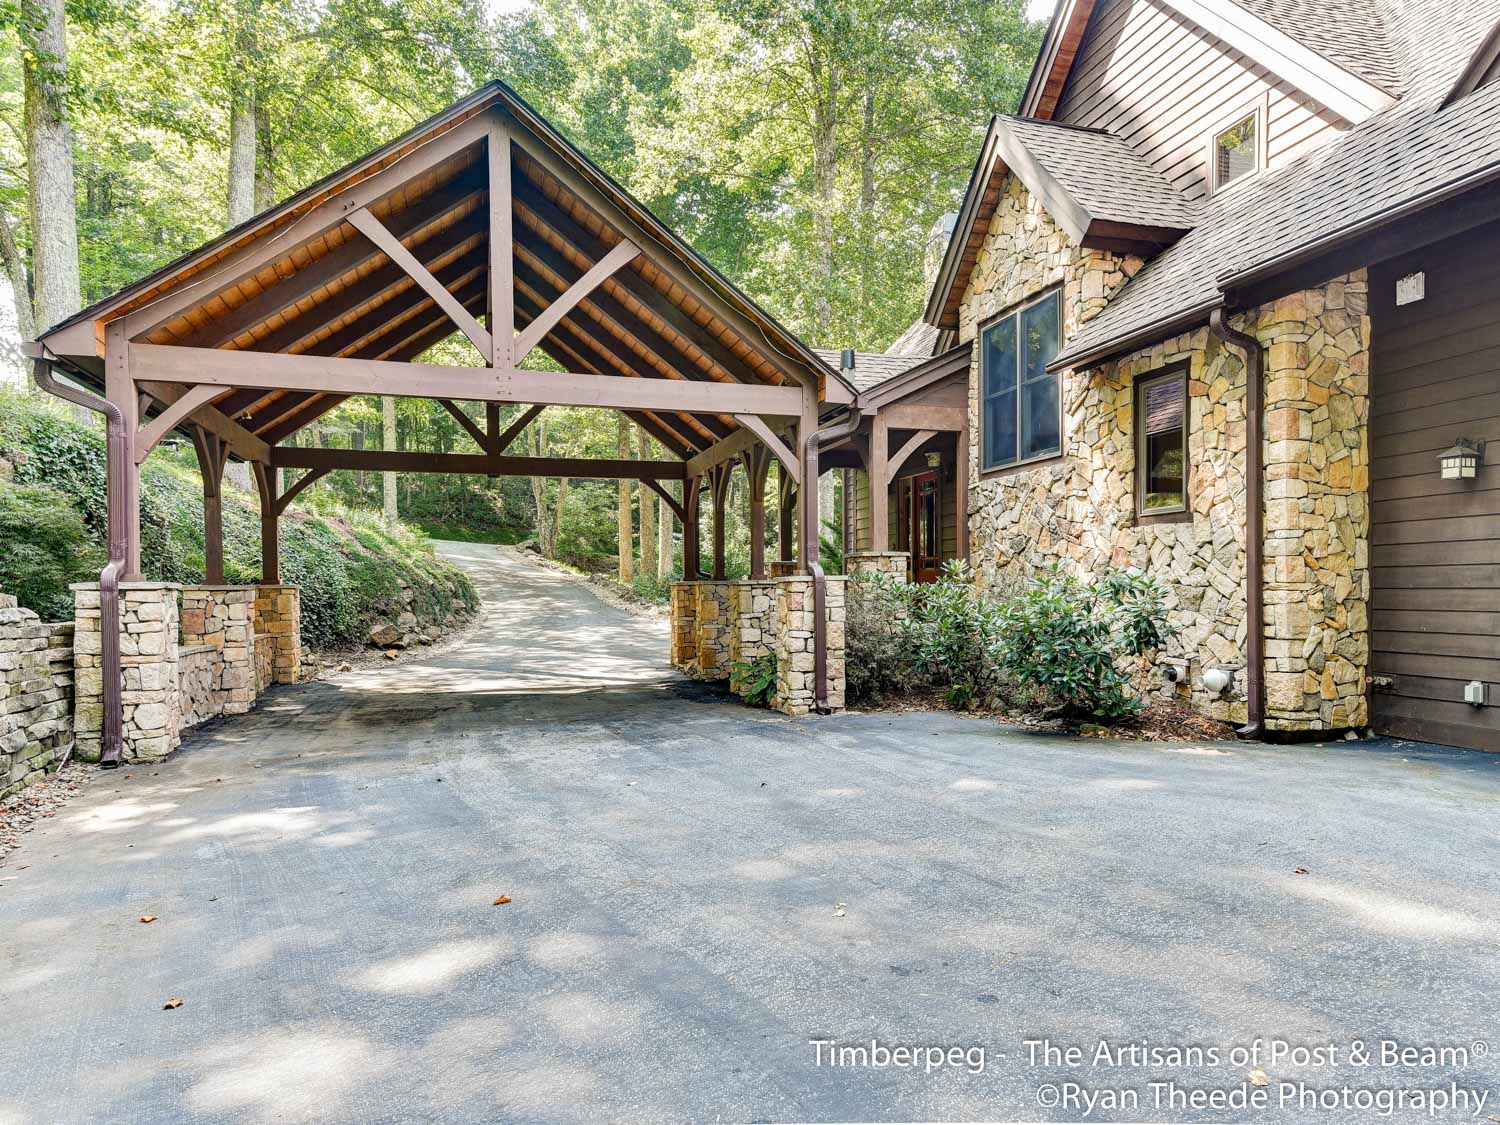 Leconte Mountain Cottage Asheville, NC (5607) exterior view of timber frame carport